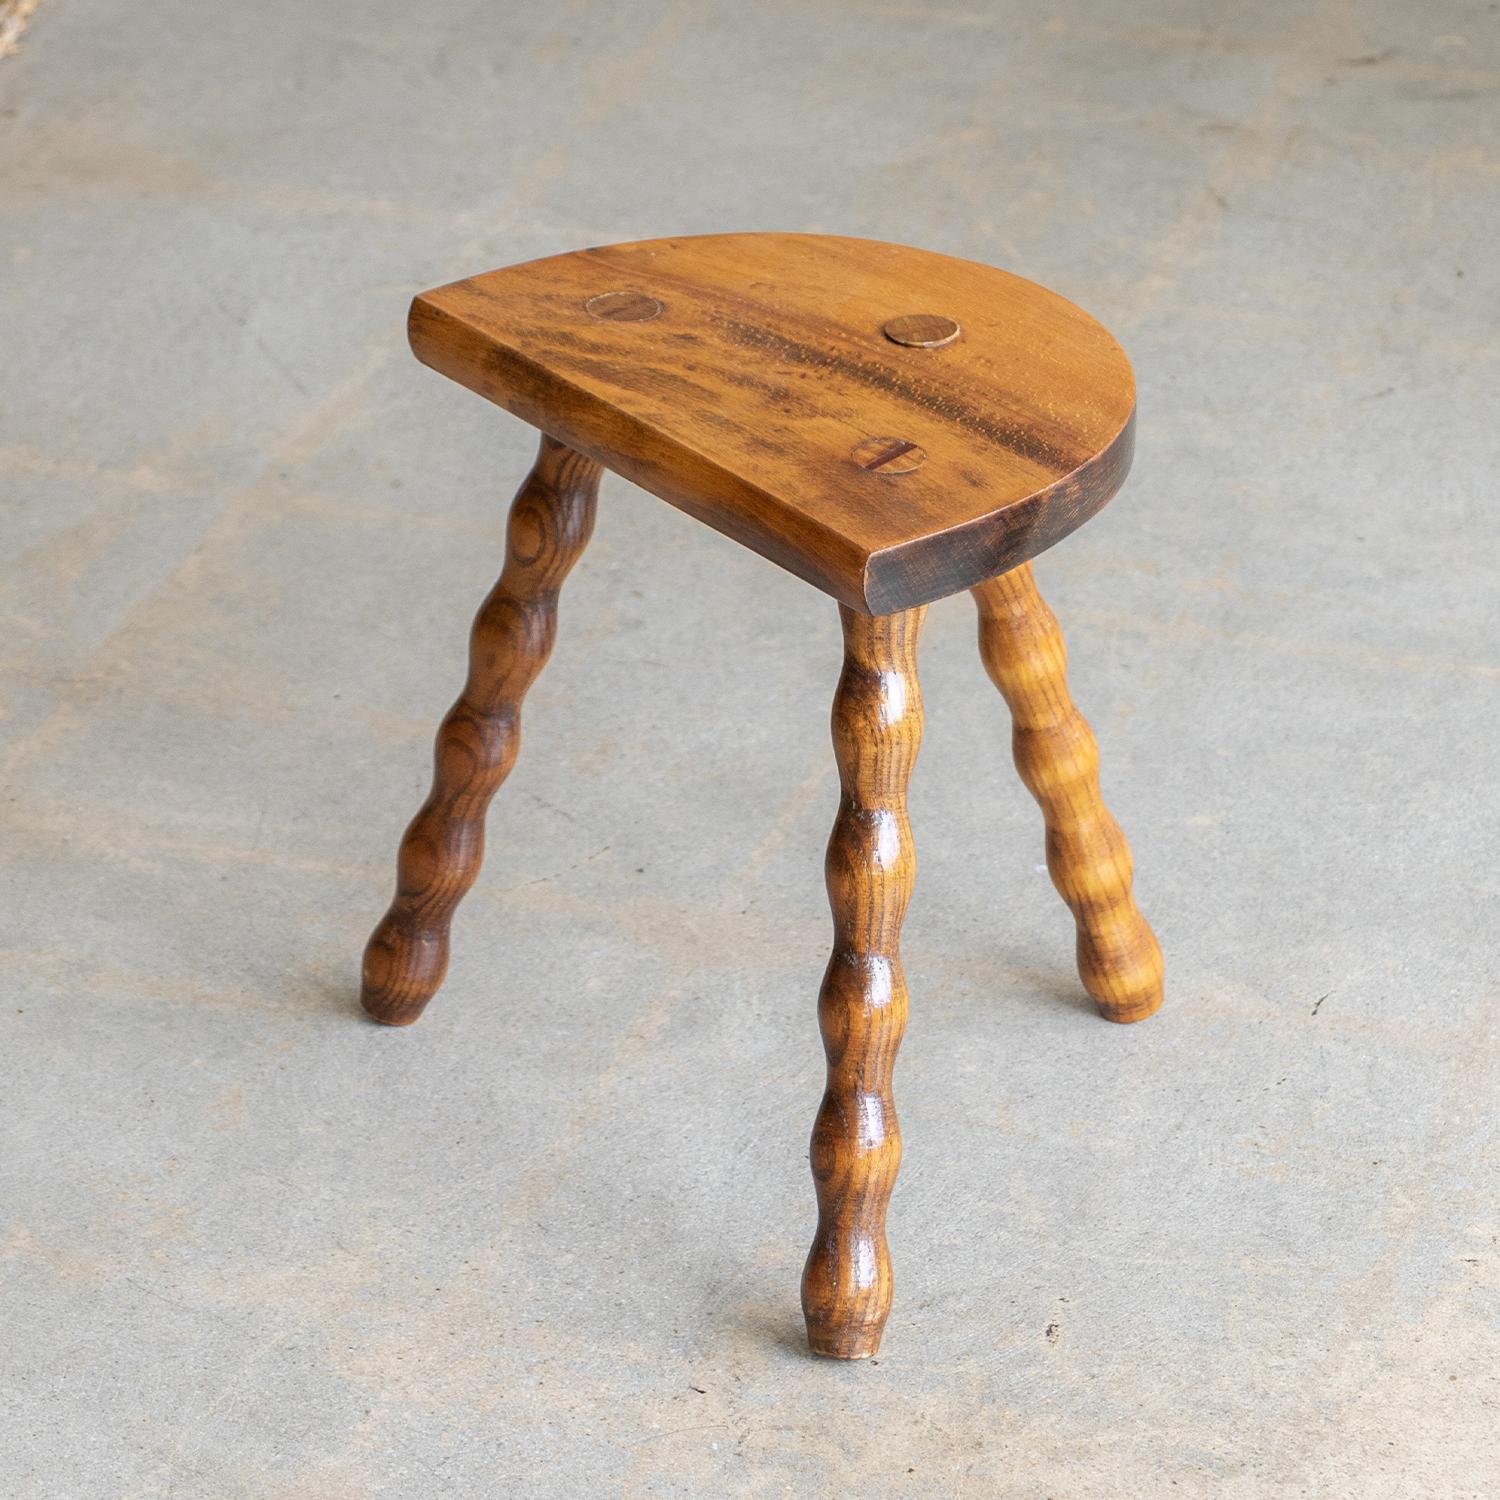 Vintage short stool with semi-circle seat and beautiful wavy legs from France. Original finish with great age markings and patina. Can be used as a stool or as side table next to chairs.